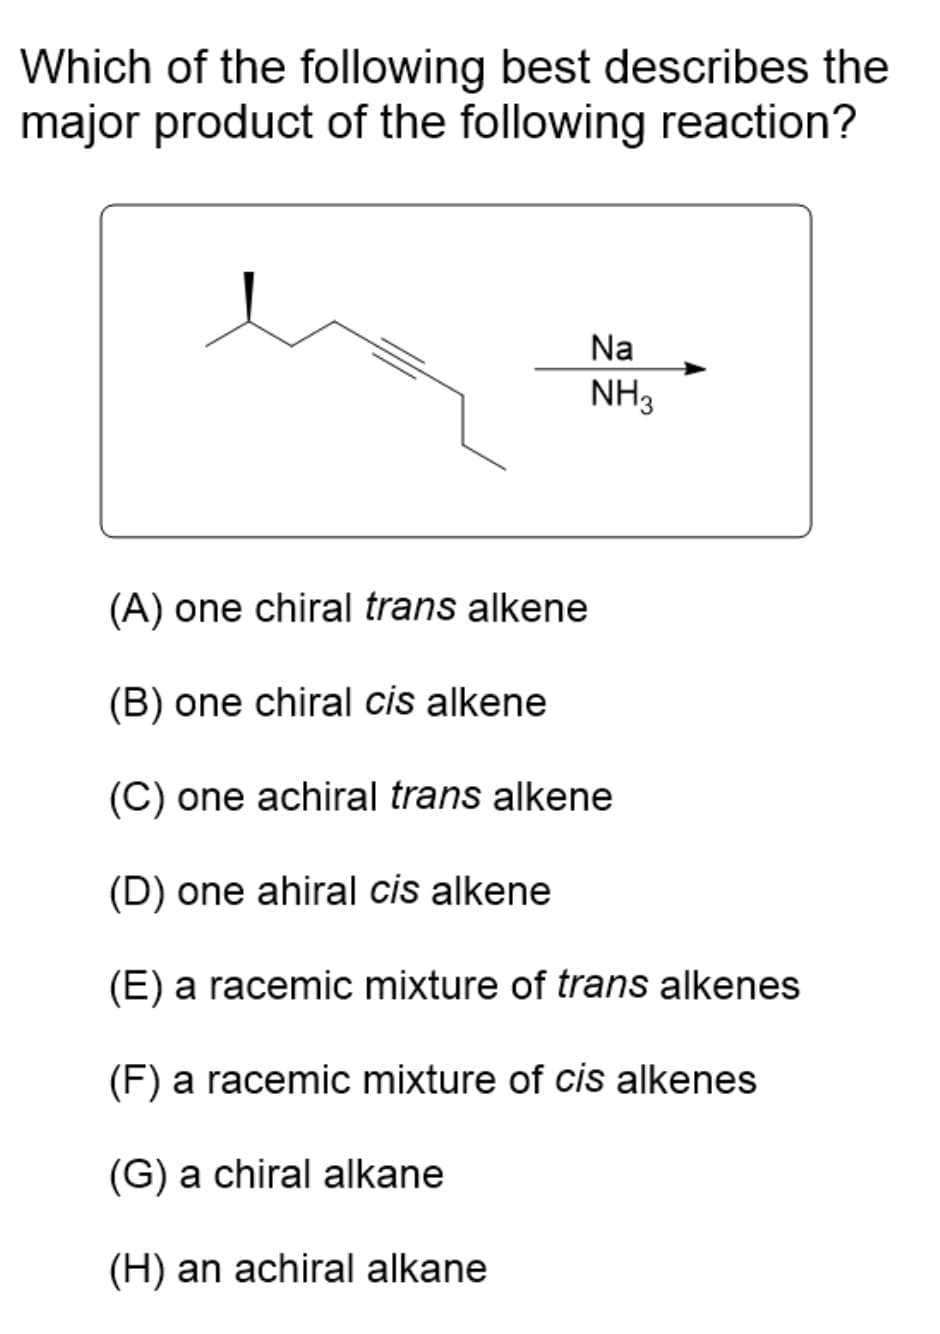 Which of the following best describes the
major product of the following reaction?
Na
NH₂
(A) one chiral trans alkene
(B) one chiral cis alkene
(C) one achiral trans alkene
(D) one ahiral cis alkene
(E) a racemic mixture of trans alkenes
(F) a racemic mixture of cis alkenes
(G) a chiral alkane
(H) an achiral alkane